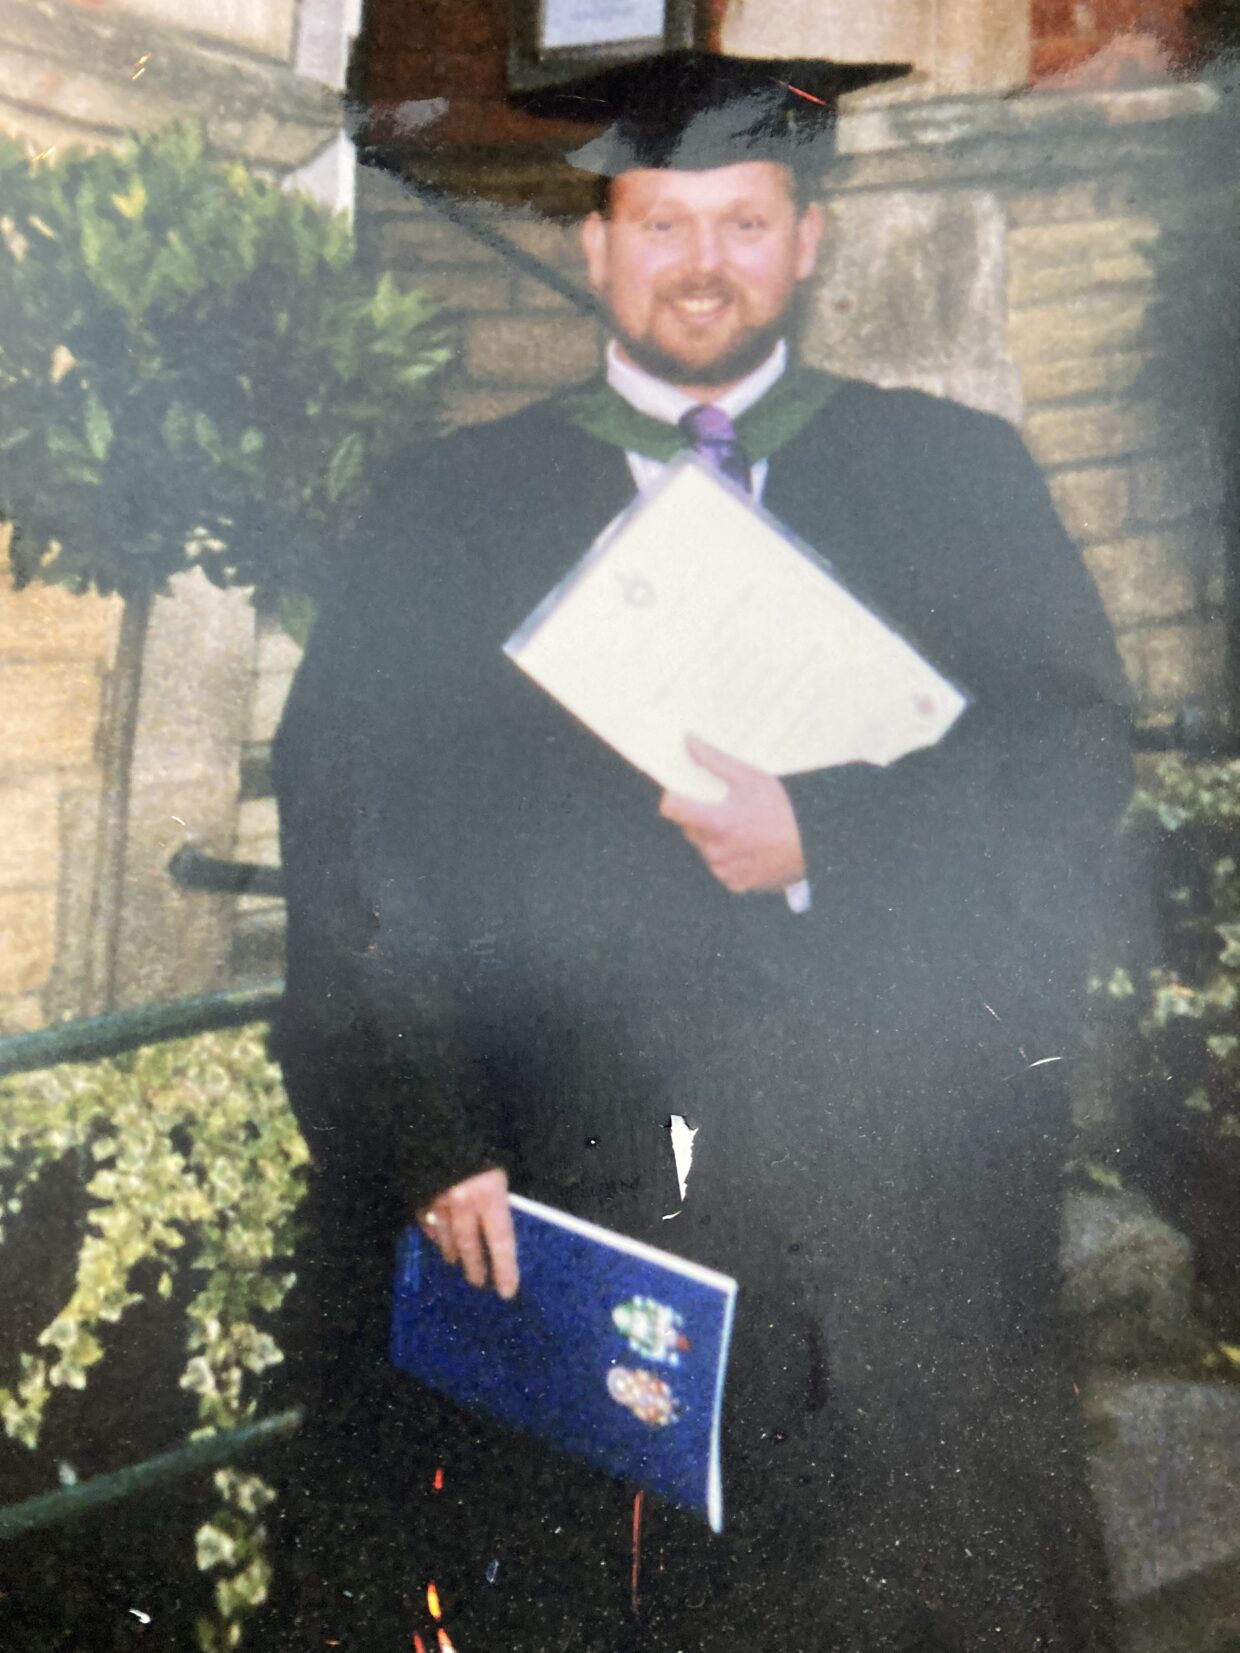 Michael is wearing a graduation cap and gown and is holding his degree certificate. He is standing outside in a garden.